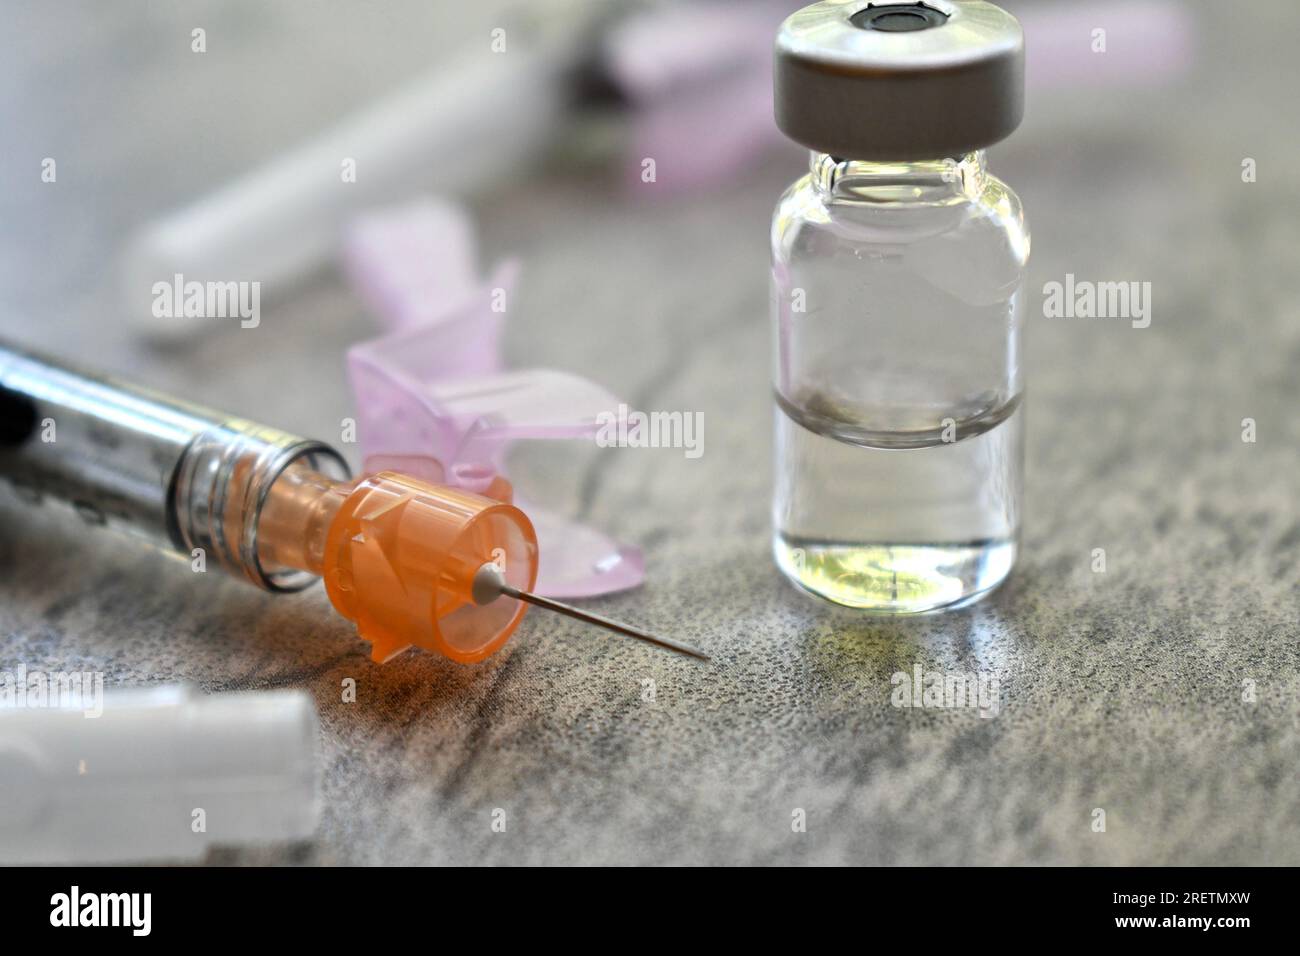 Vial of medicine with syringe on a grey surface Stock Photo